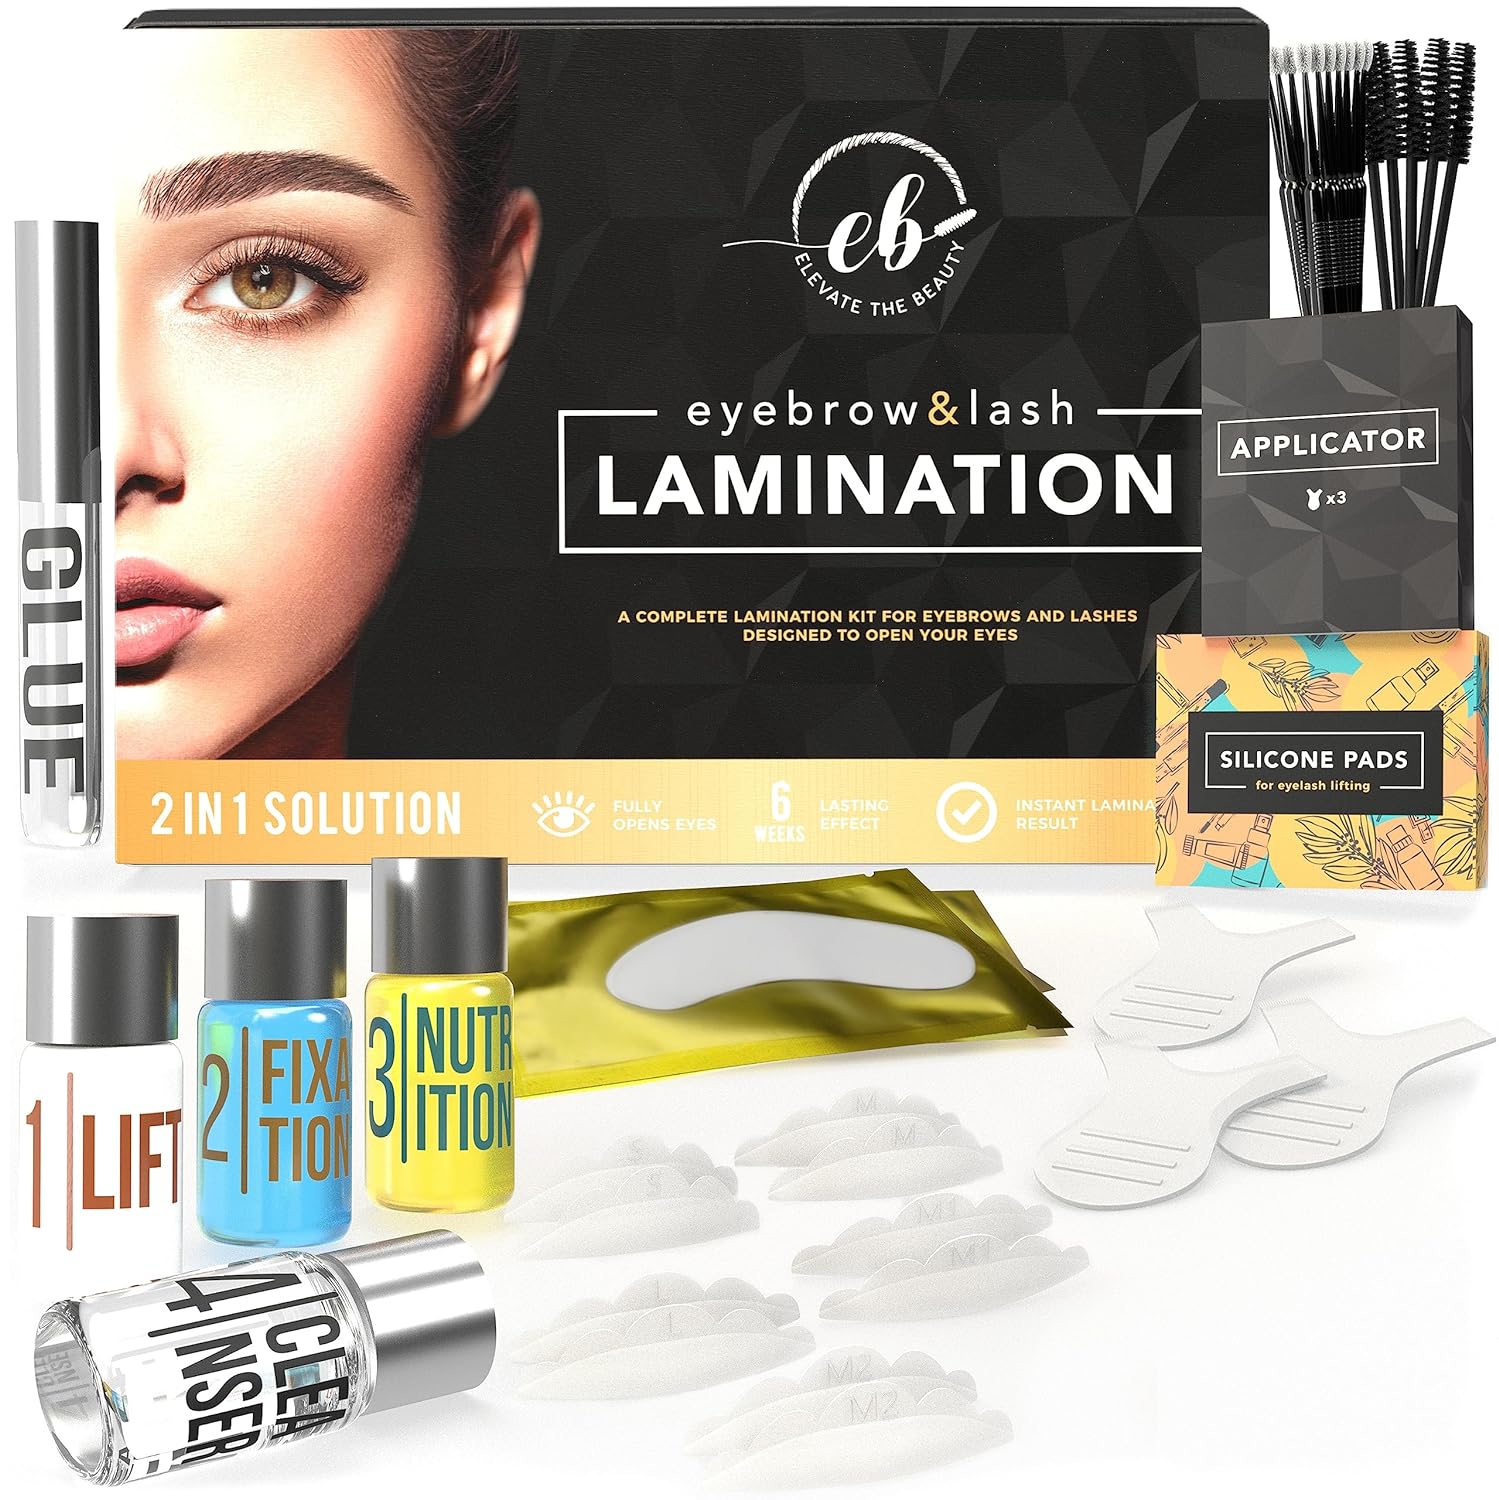 Eye Brow Lamination Kit Professional - Complete 2in1 DIY Lash Lift and Brow Lamination Kit at Home - Brow Perm Lamination Kit - Easy to Use - Instant Long-Lasting Results by Elevate the Beauty